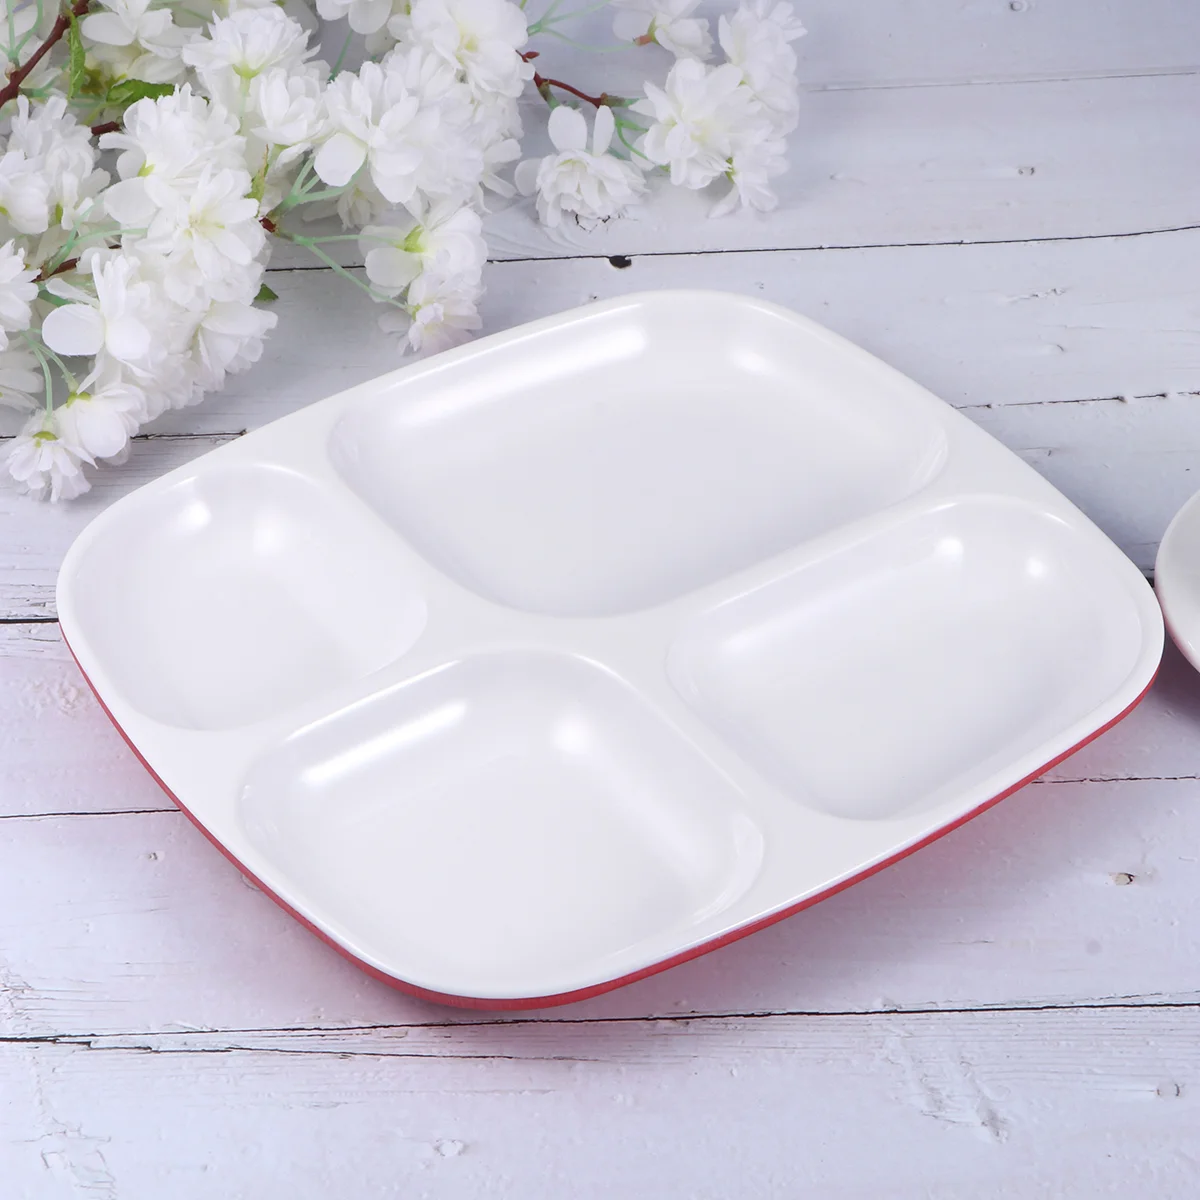 

Plates Plate Divided Dish Serving Tray Dinner Compartment Portion Control Adults Kids Lunch Meal Trays Diet Weight Melamine Loss